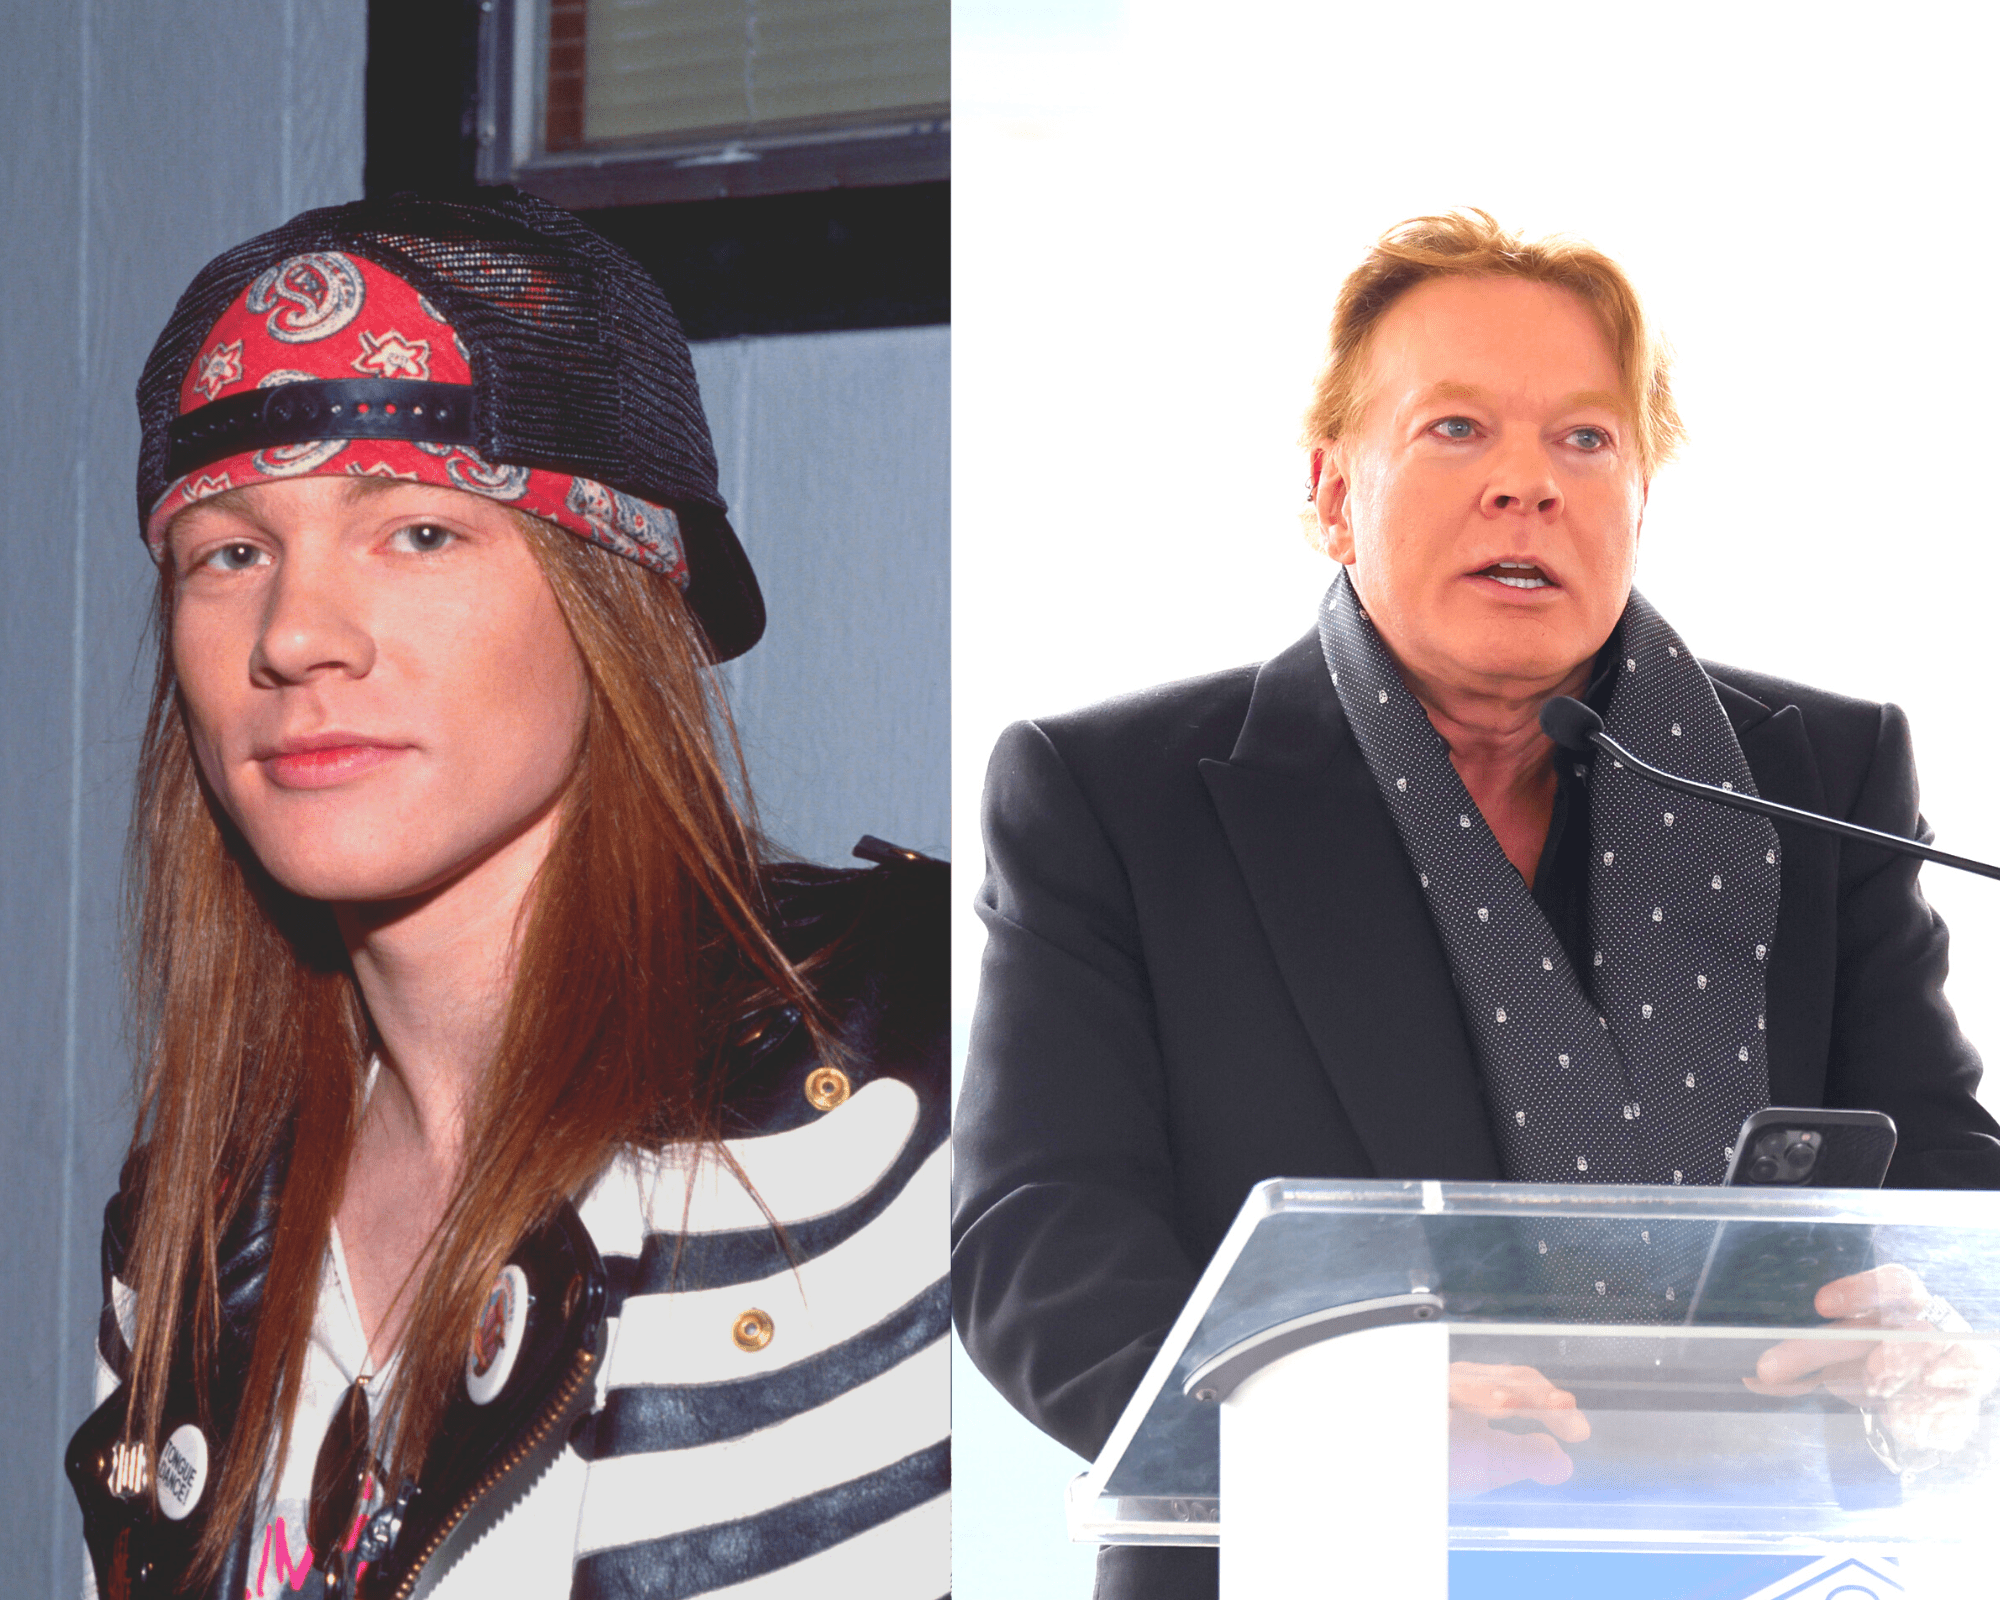 Axl Rose in 1980 | Axl Rose delivering a speech on January 22, 2023 in Memphis, Tennessee | Getty Images 